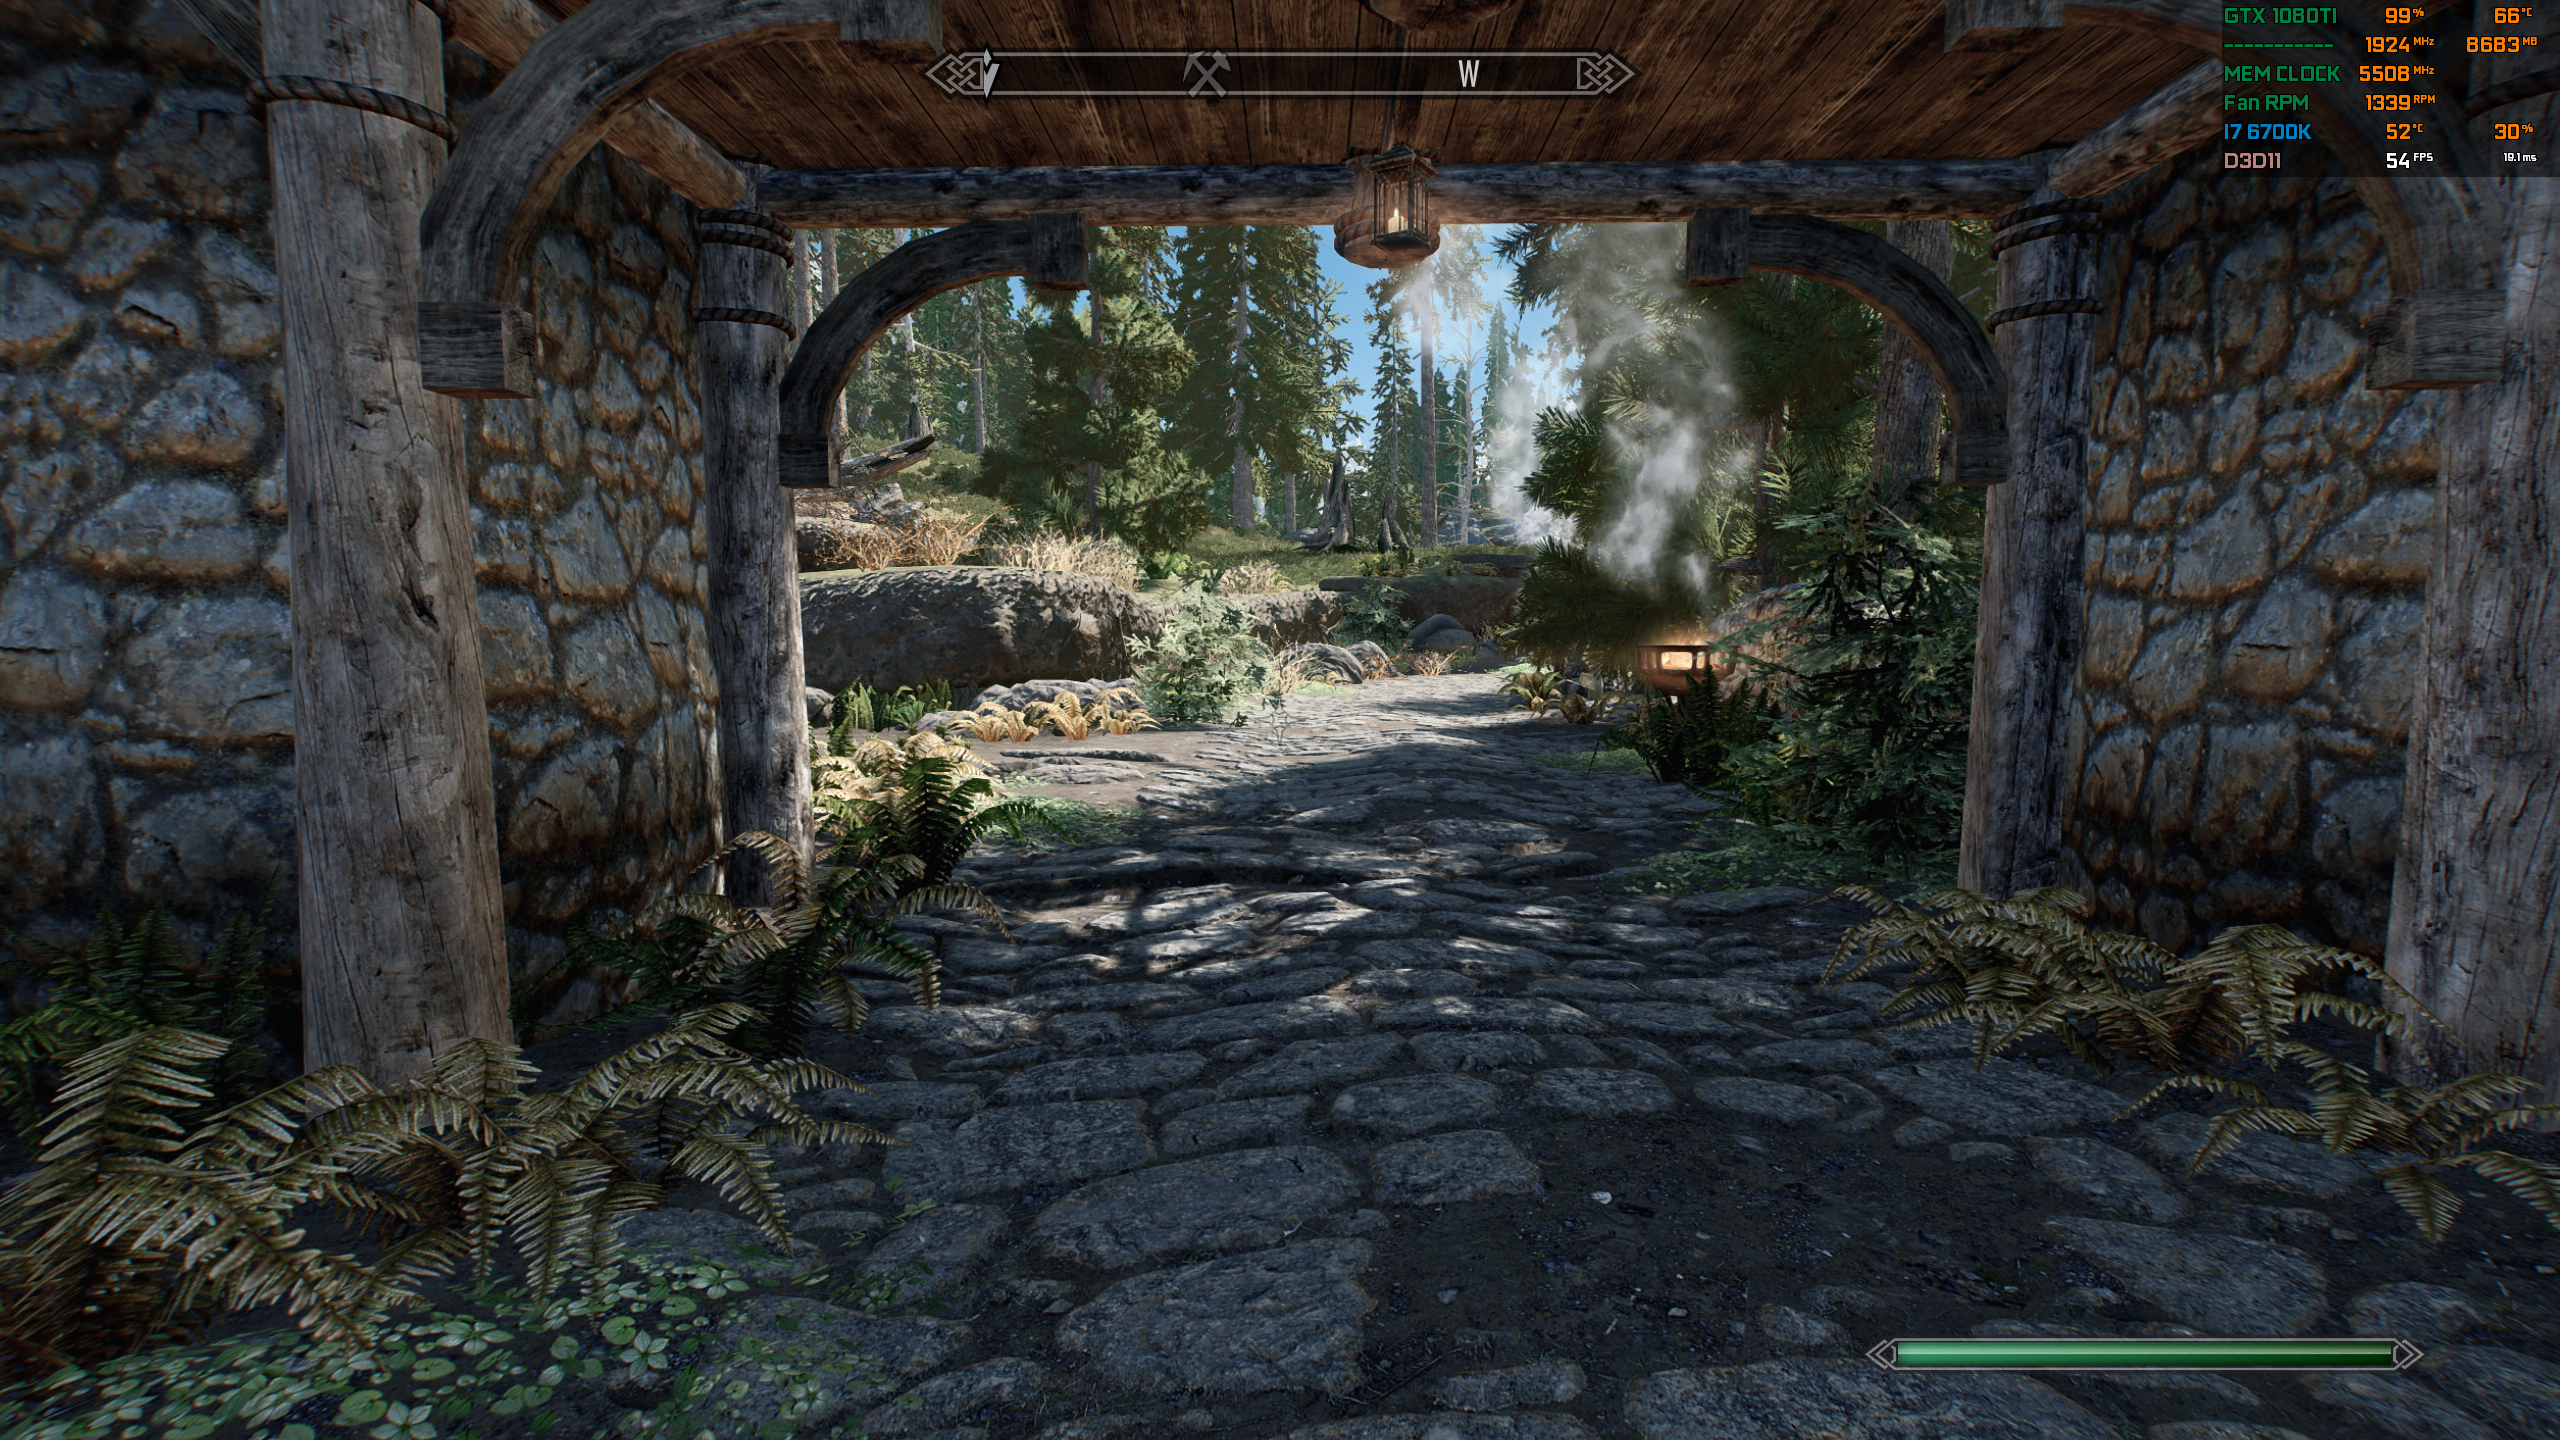 Gtx 1080 Vs 4k Max Modded Skyrim At 2k Res Anandtech Forums Technology Hardware Software And Deals